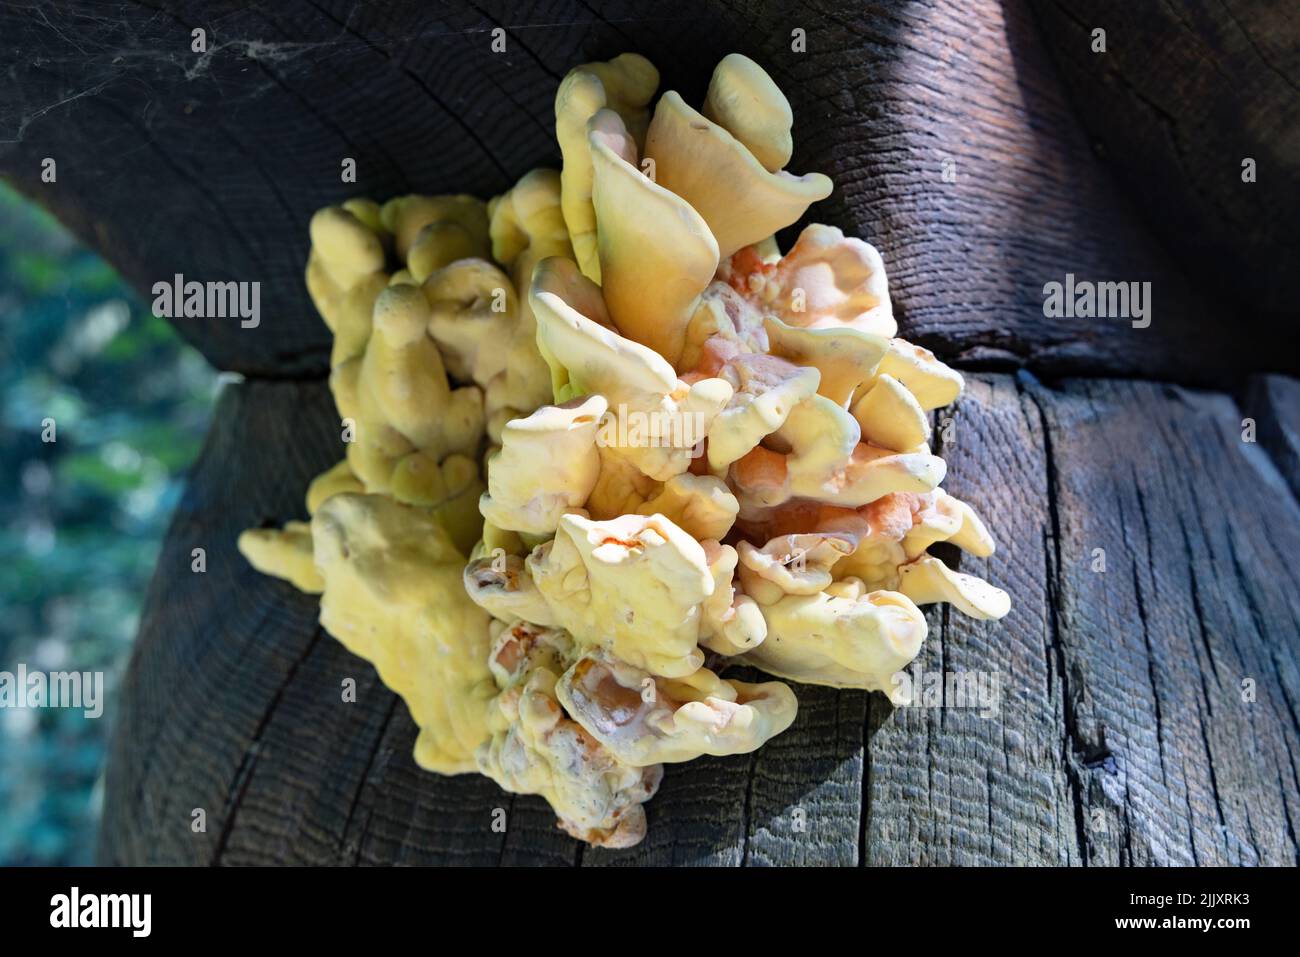 Laetiporus fungus close up, commonly known as Sulphur shelf, Chicken of the Woods, Chicken fungus, and Chicken mushroom due to its taste. Europe Stock Photo